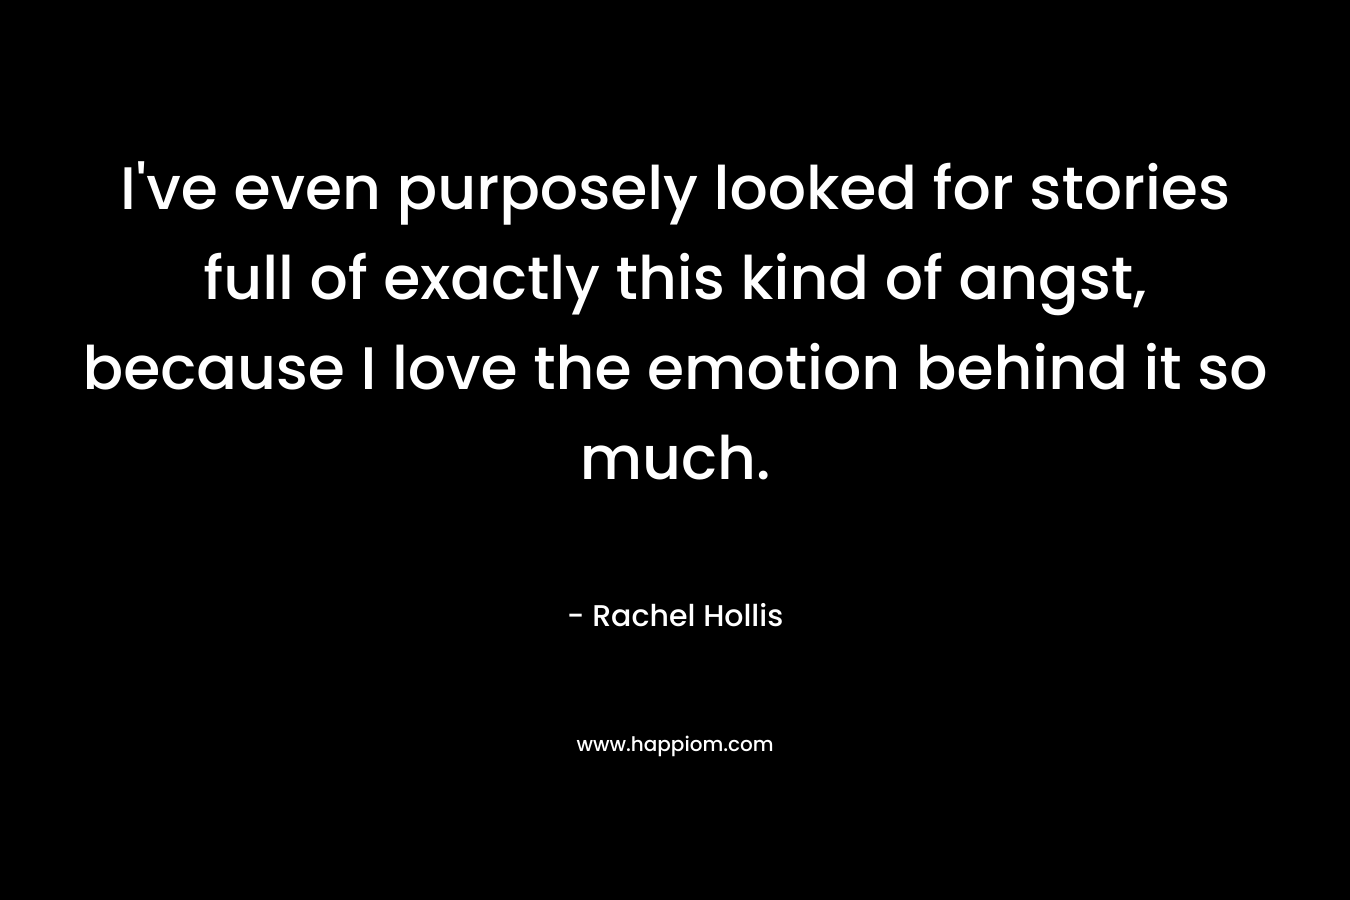 I’ve even purposely looked for stories full of exactly this kind of angst, because I love the emotion behind it so much. – Rachel Hollis